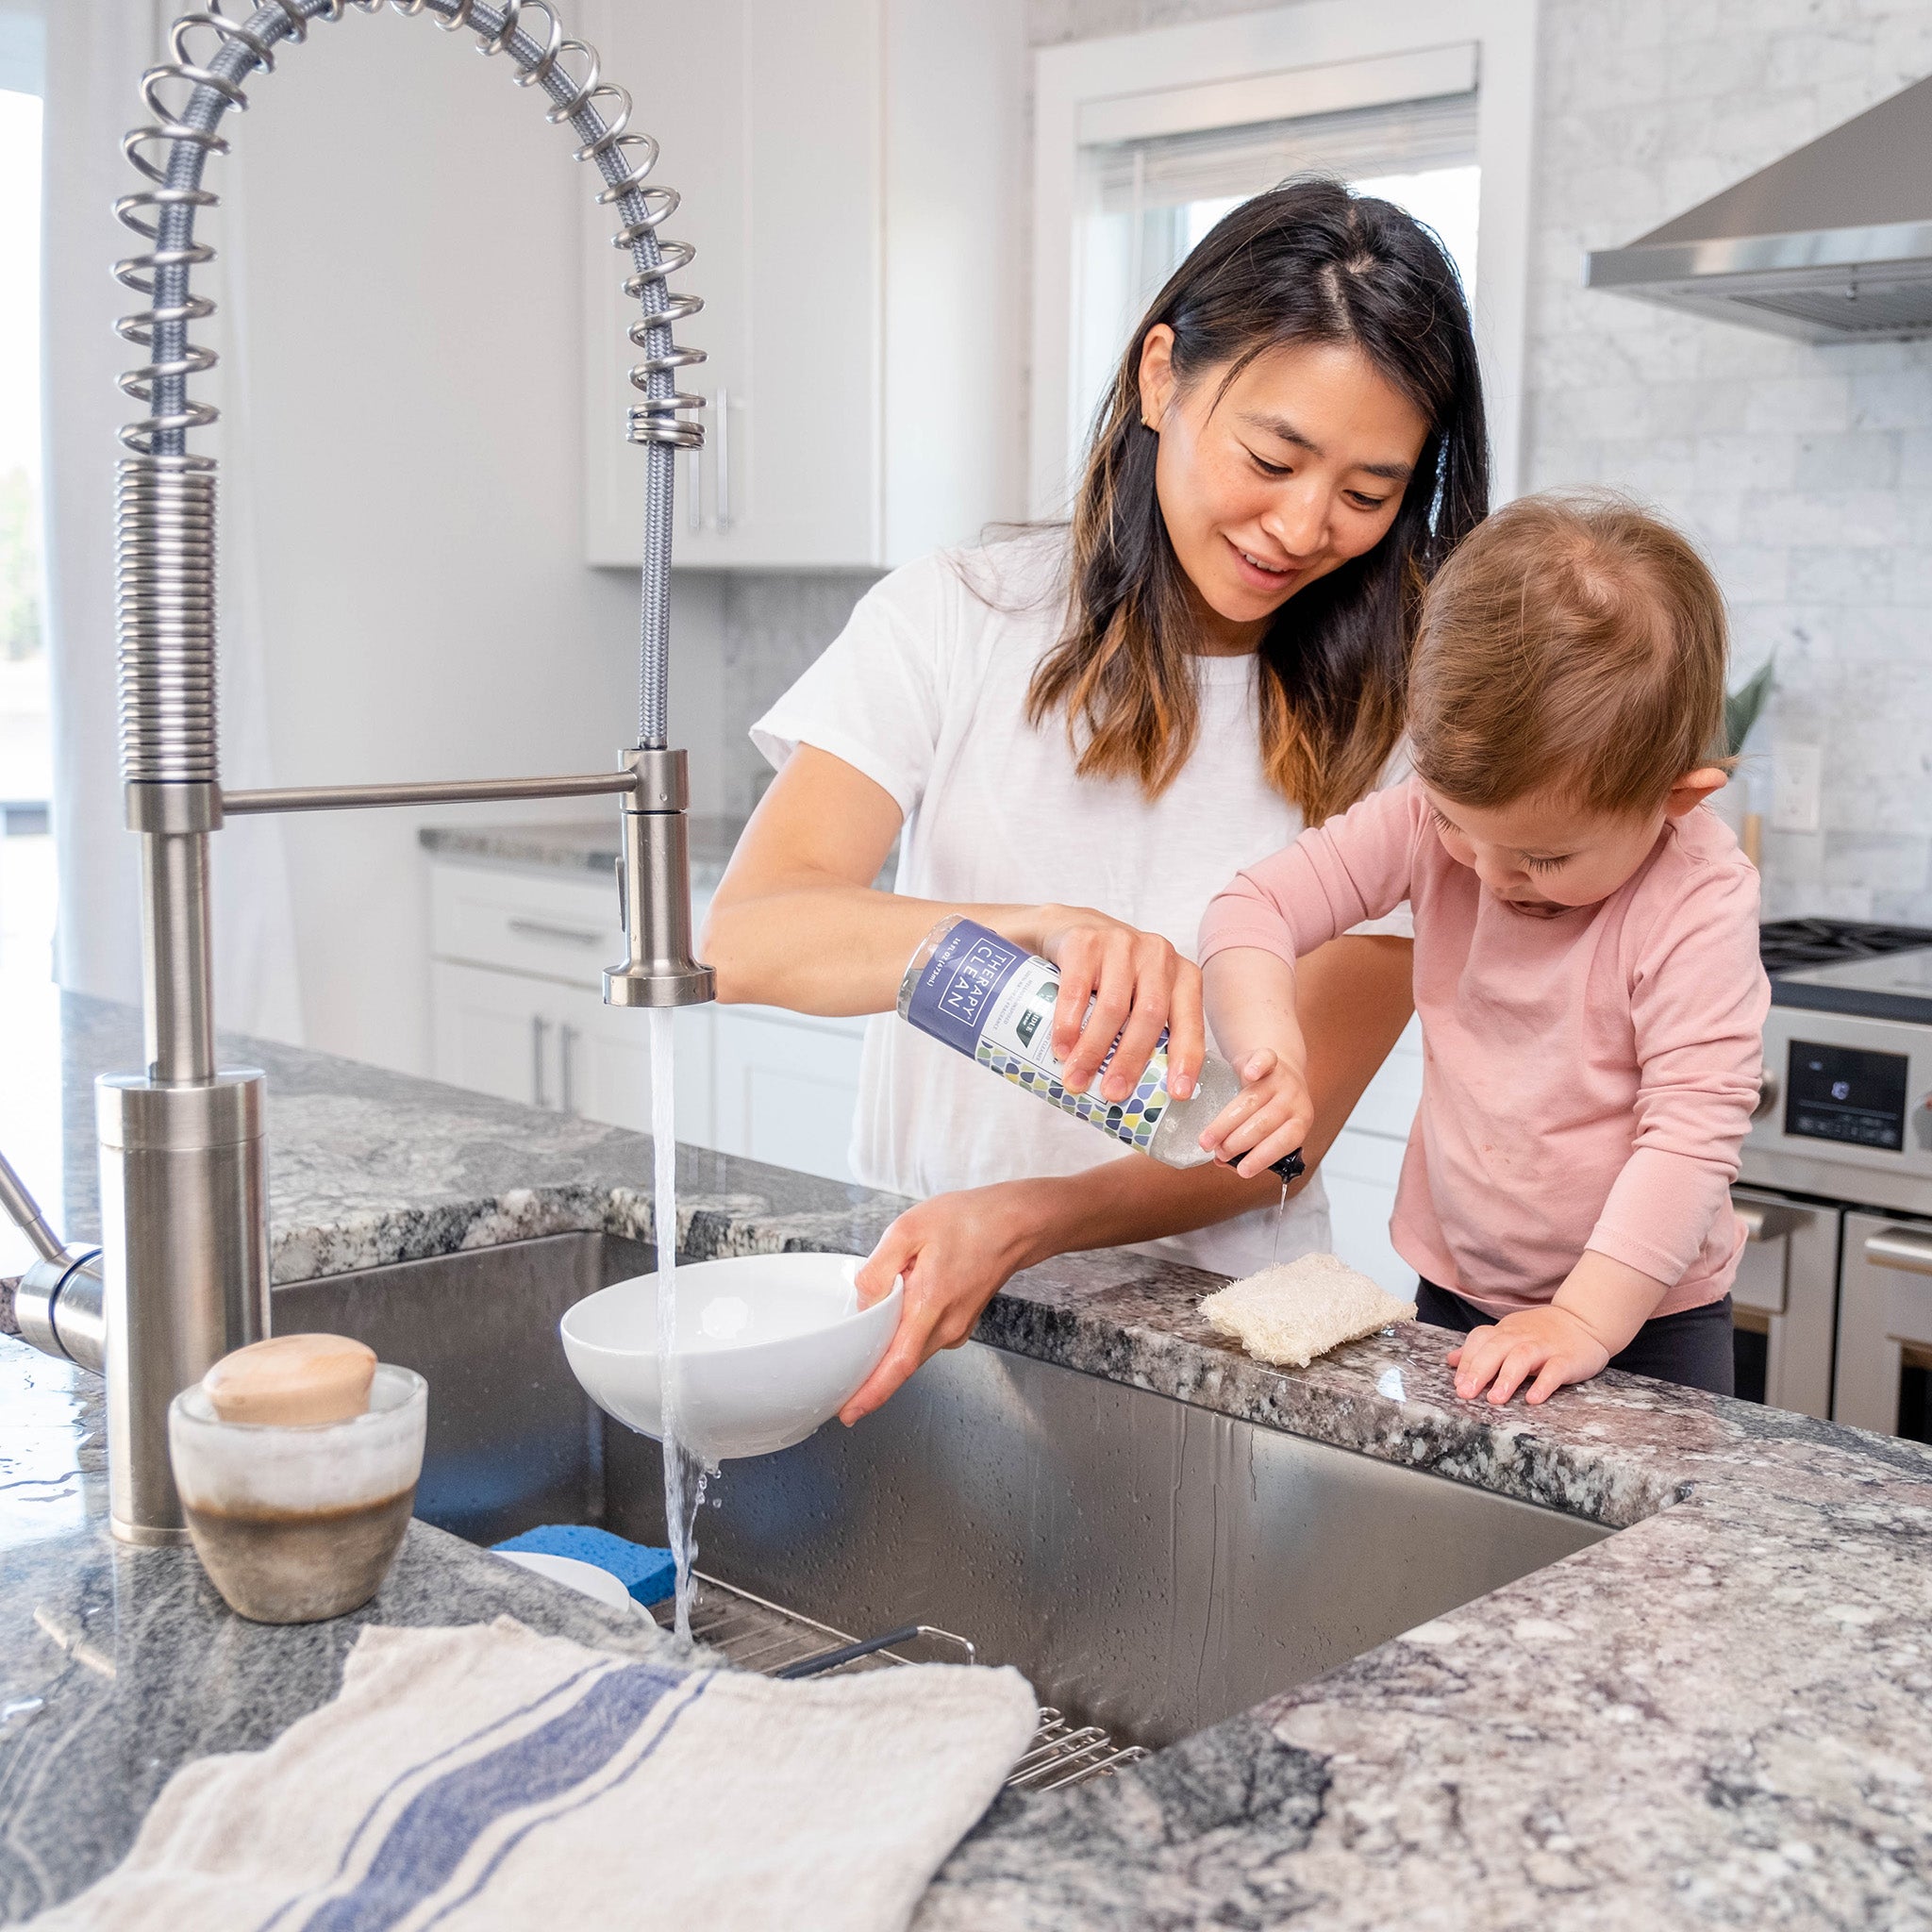 Cleaning Your Dishes Sustainably with Eco-Friendly Dish Soaps